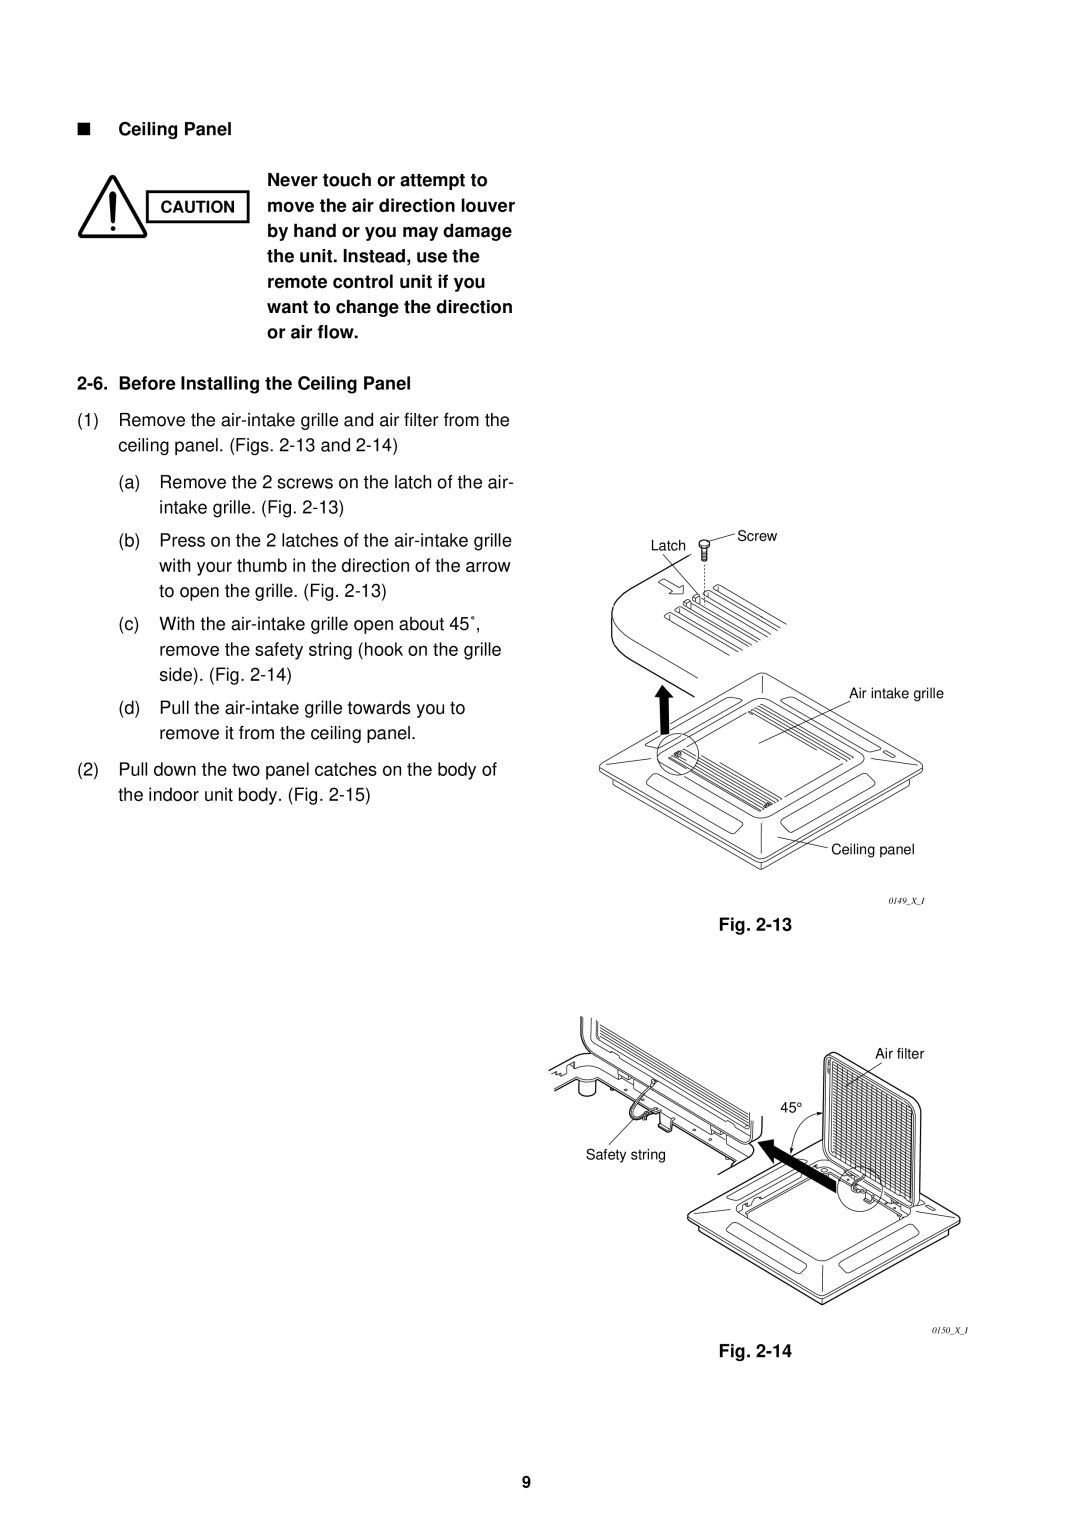 Sanyo SPW-XR254EH56 operation manual Before Installing the Ceiling Panel, Latch, Screw Air intake grille Ceiling panel 